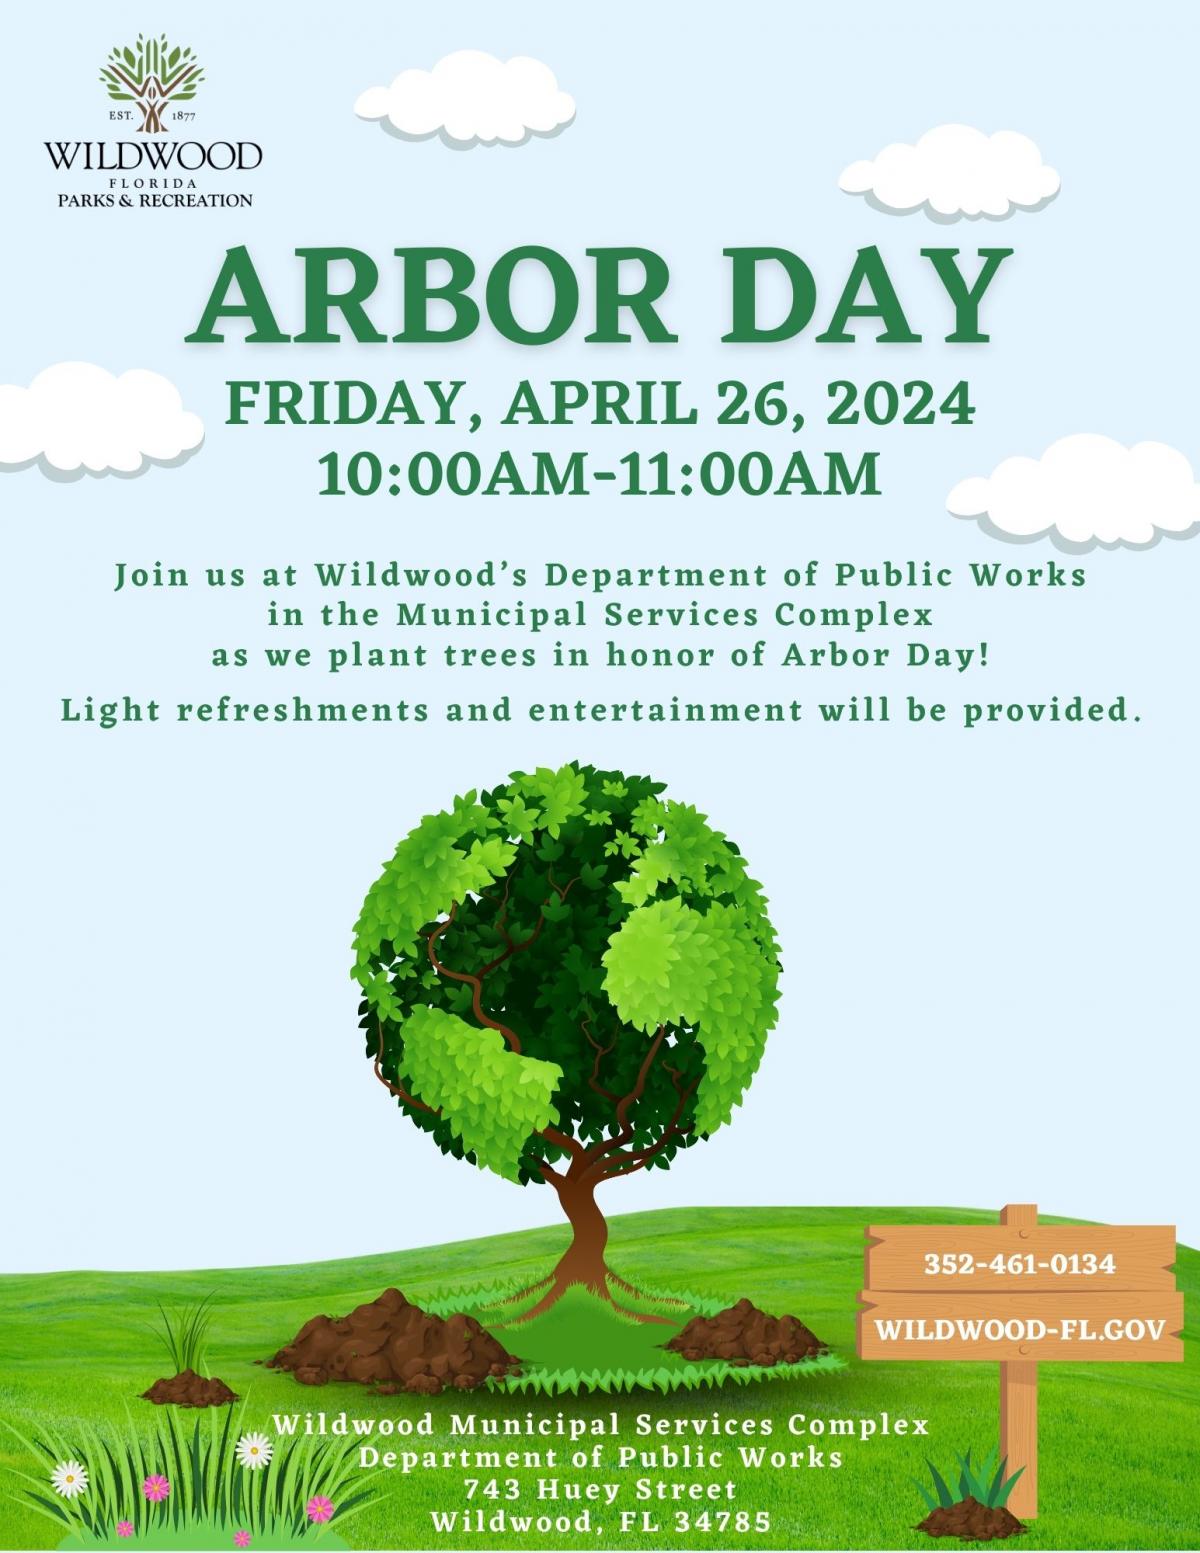 Wildwood Parks & Recreation "Arbor Day", Friday, April 26, 2024, 10-11am, Wildwood Municipal Services Complex